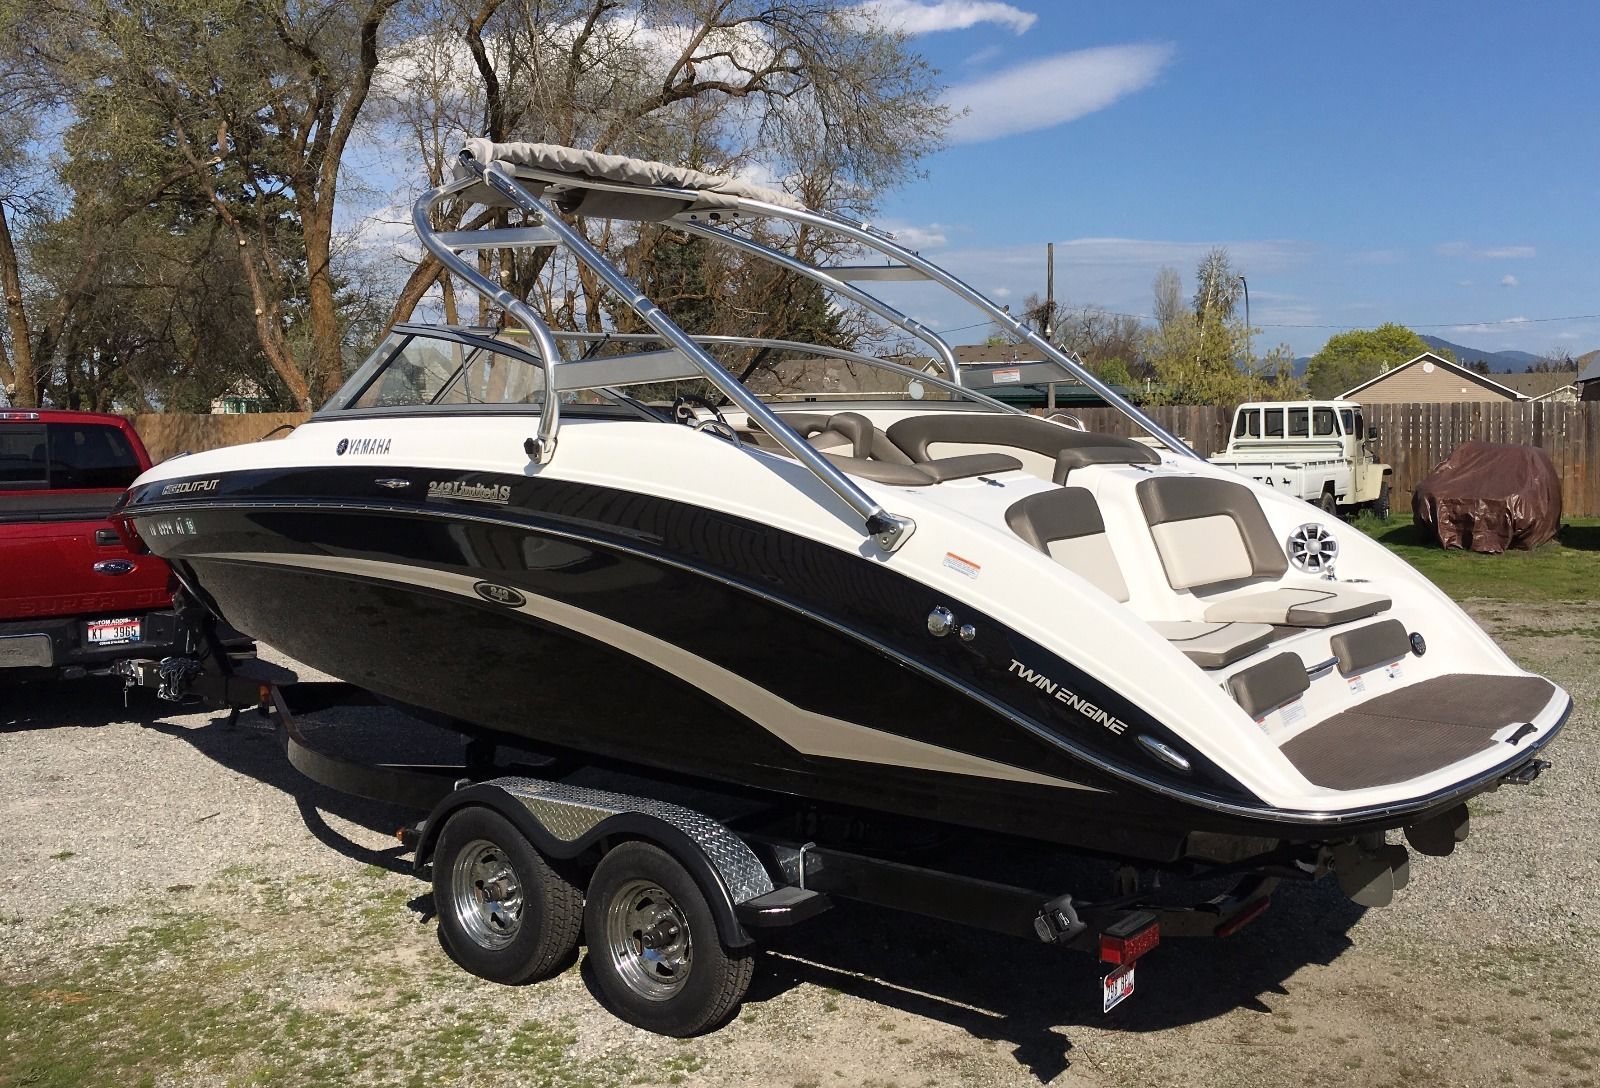 yamaha-242-limited-s-2012-for-sale-for-46-000-boats-from-usa